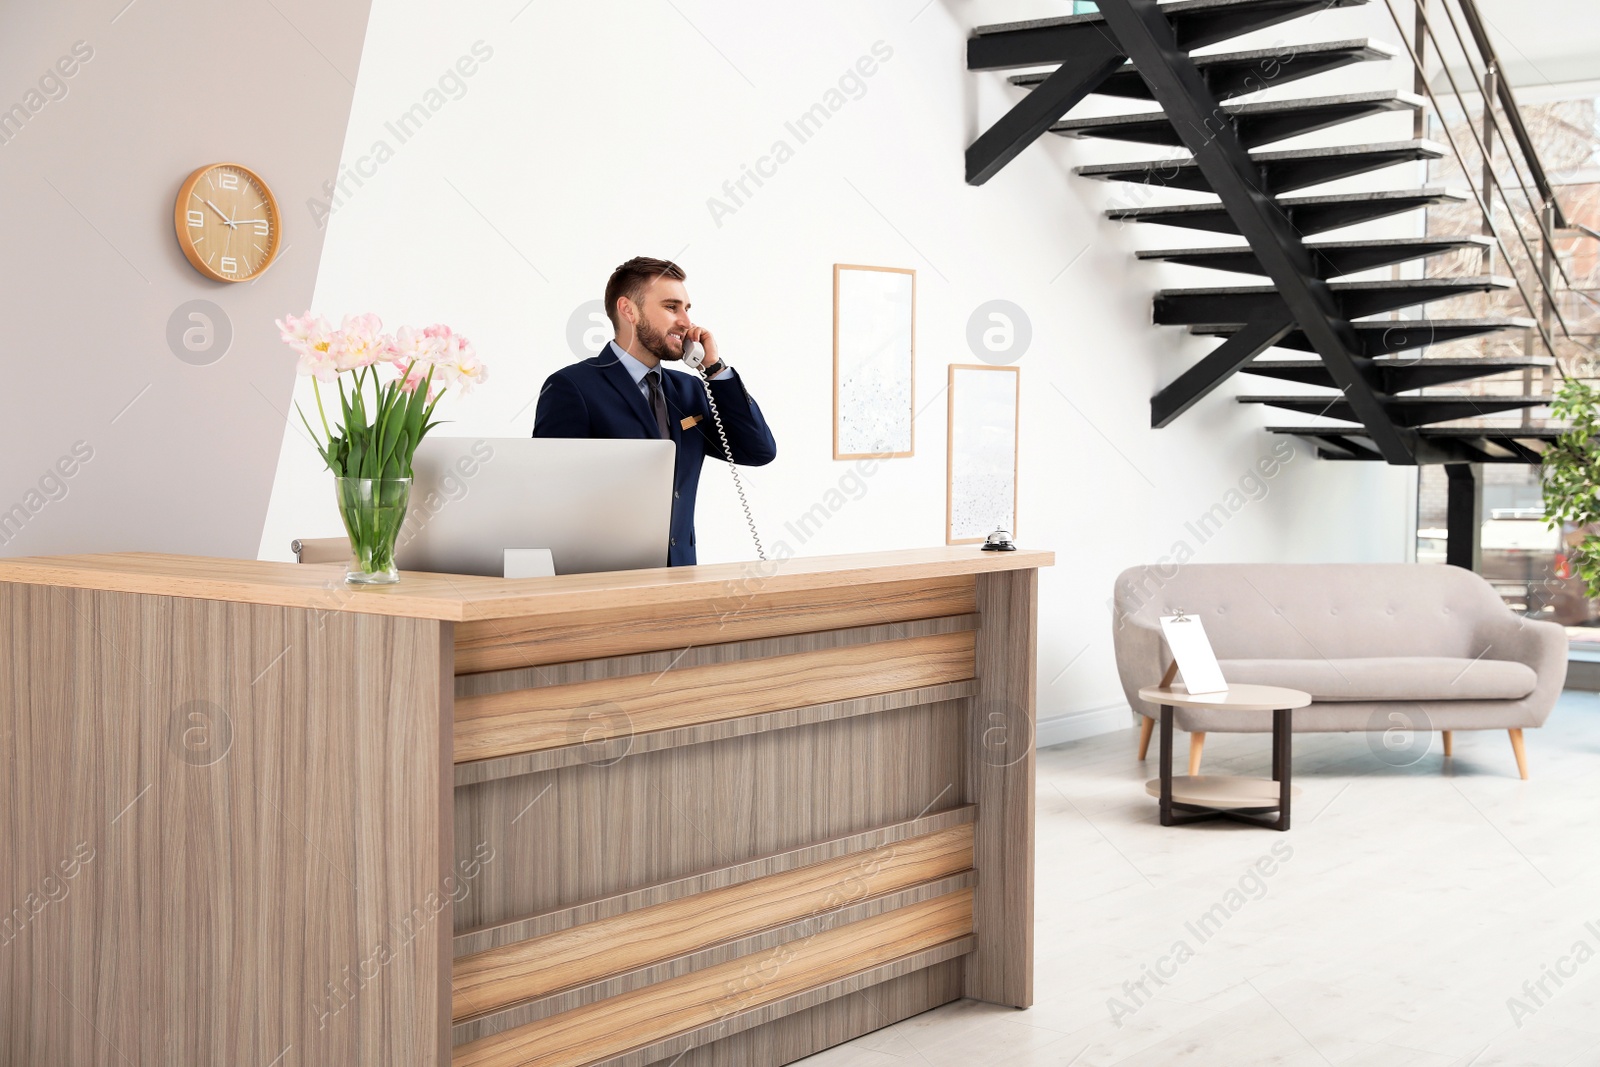 Photo of Receptionist talking on telephone at desk in modern hotel